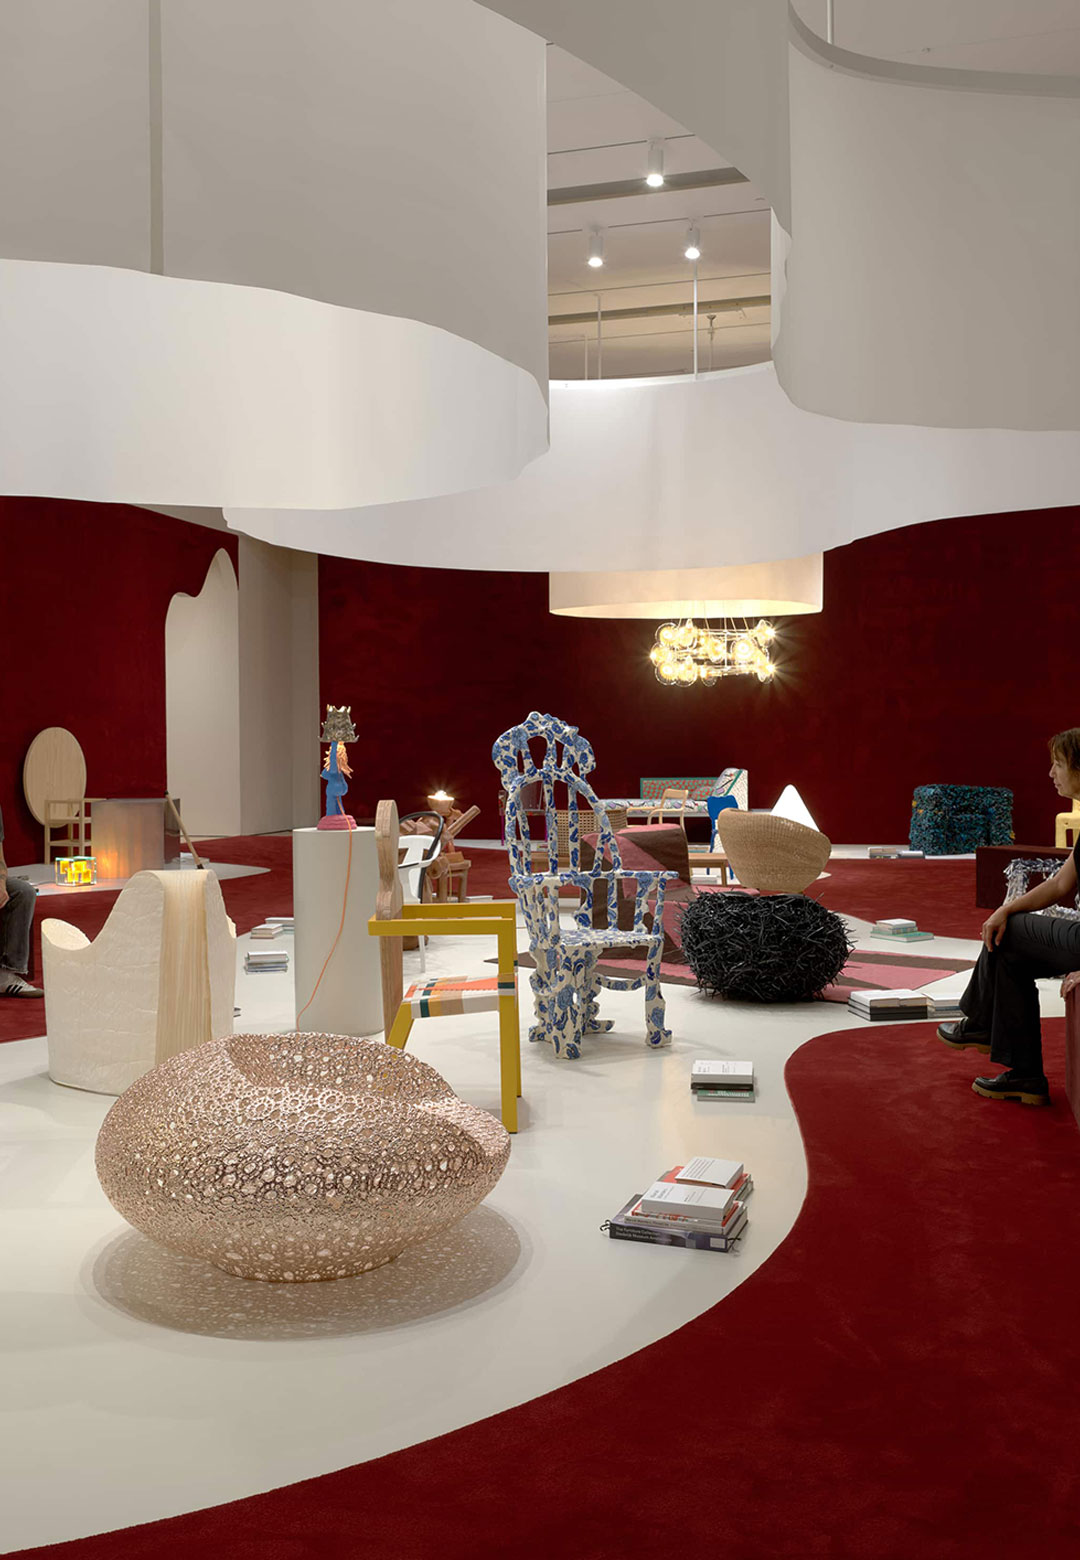 SFMOMA presents ‘Conversation Pieces’ in an evocative display of expressive furniture